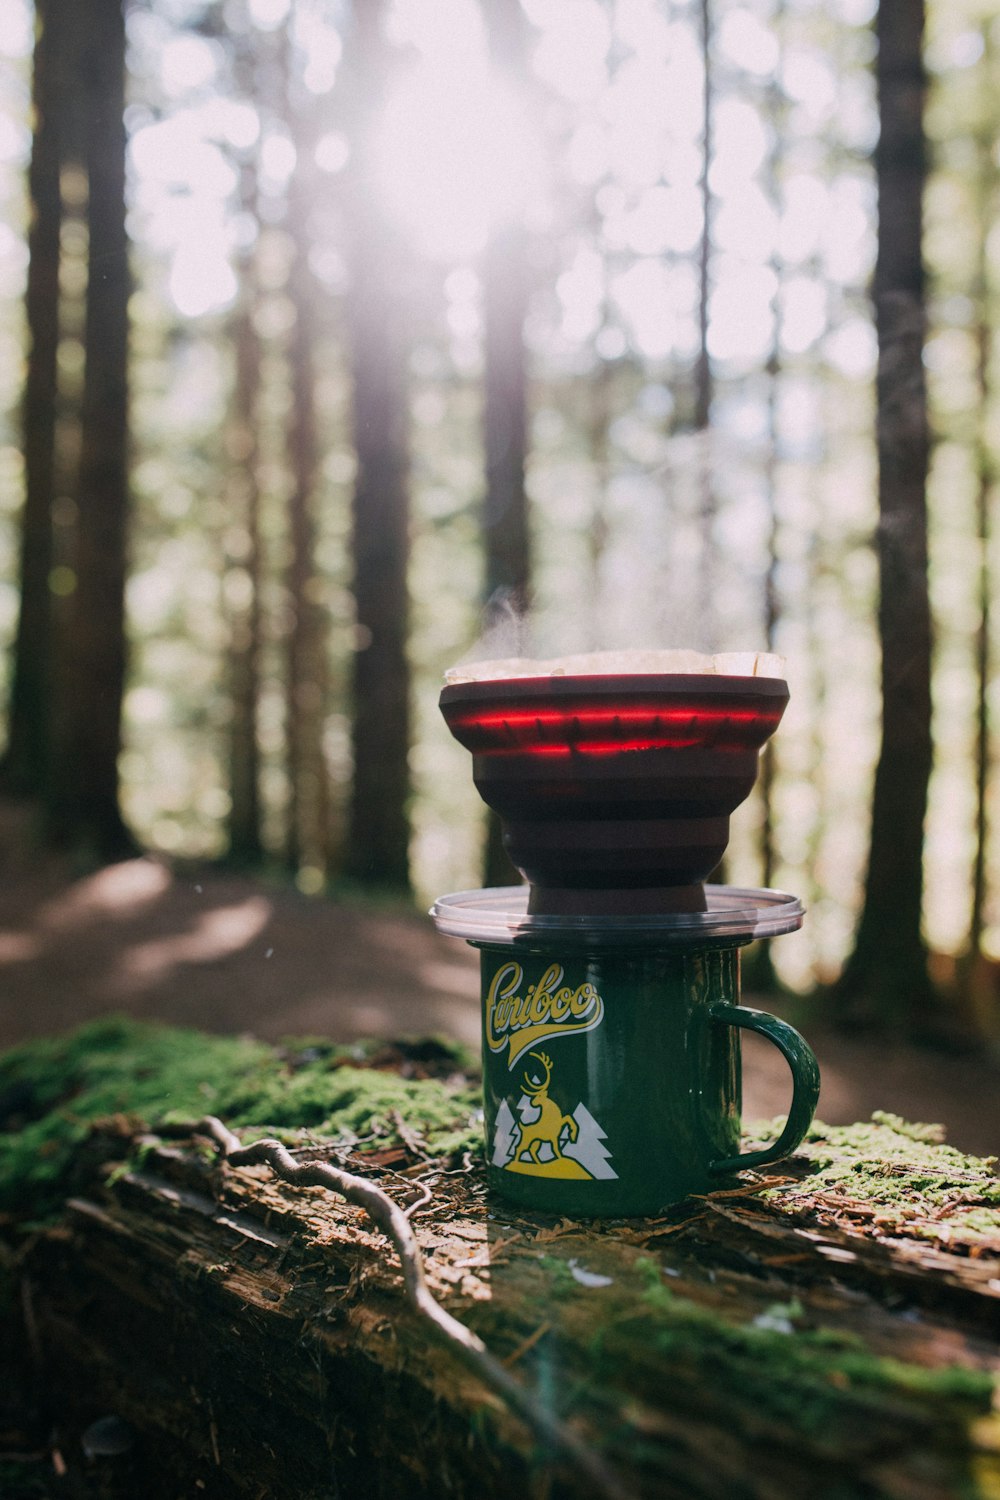 red and green ceramic mug on brown wooden log